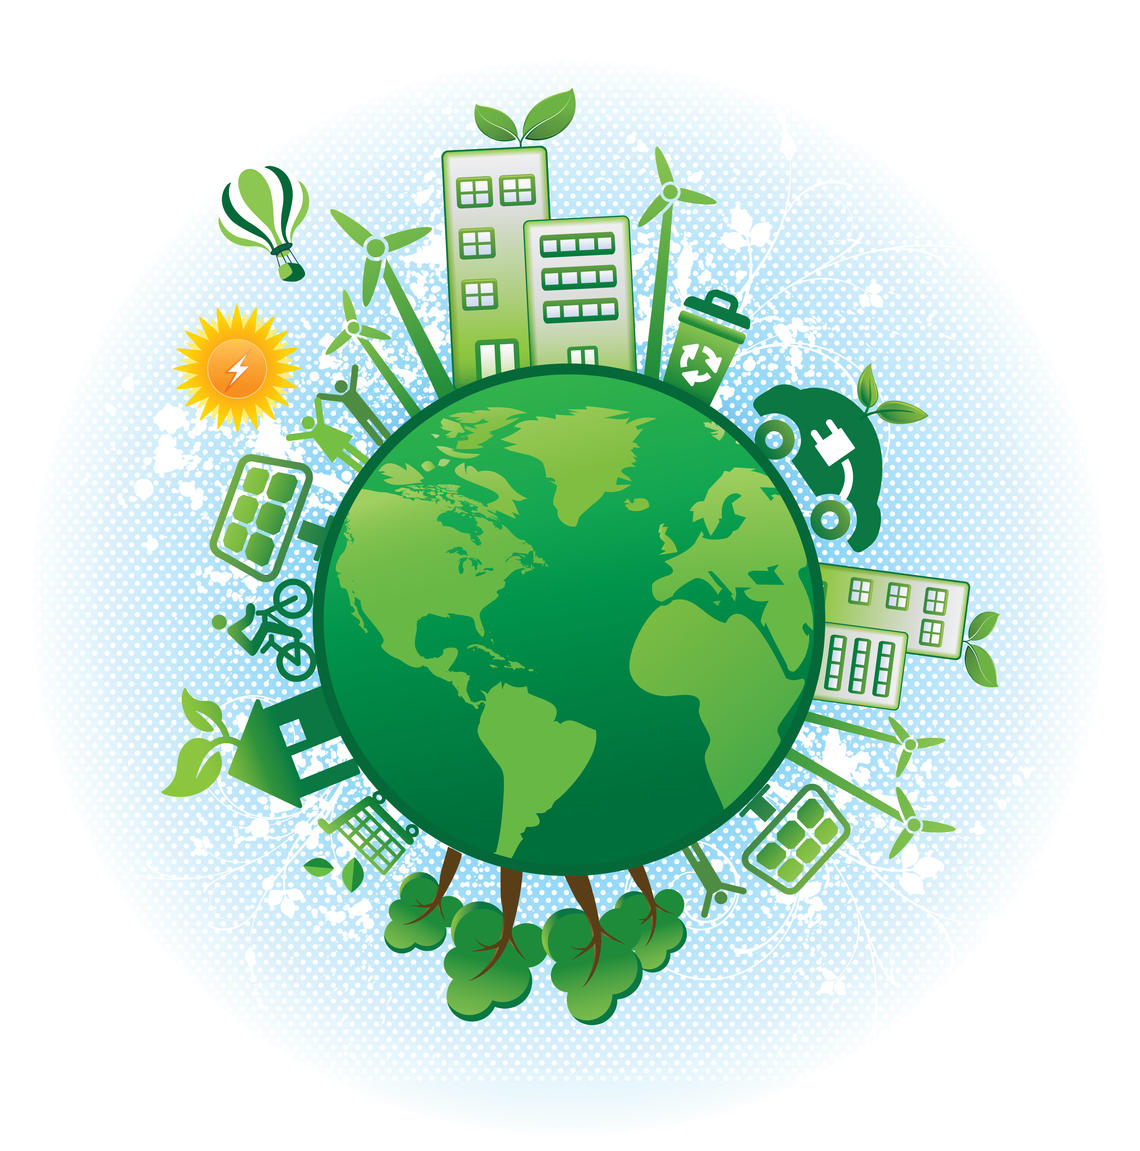 Earth Day is celebrated internationally every year on April 22. This year marks the 25th anniversary of Earth Day Canada.